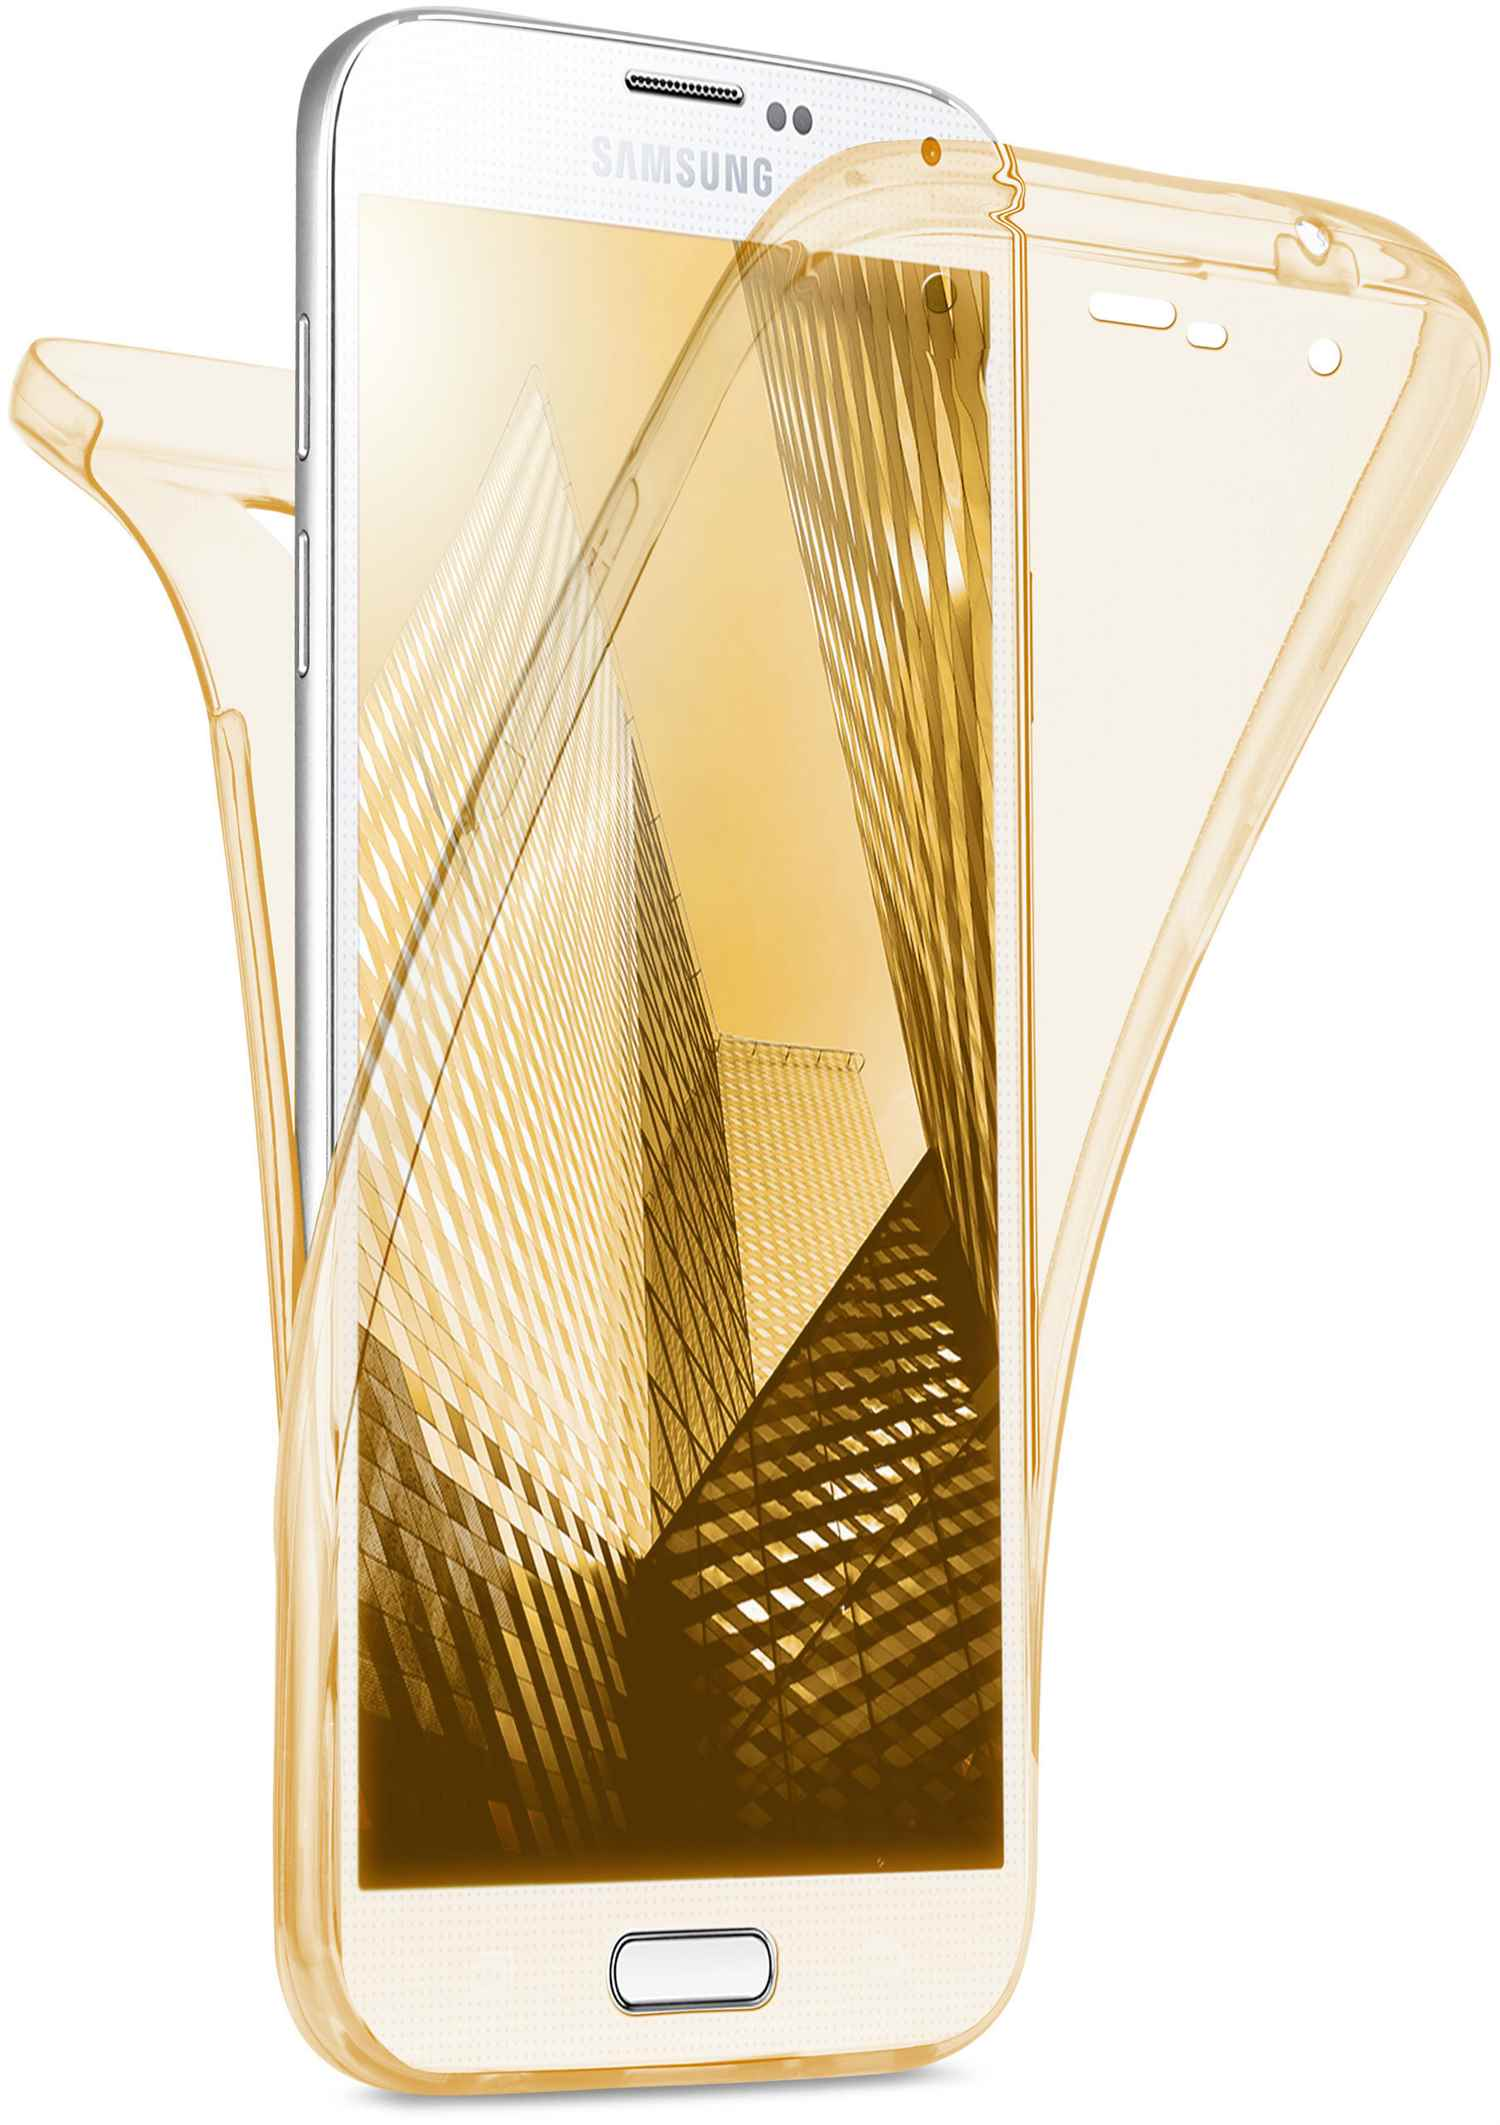 MOEX Double Cover, Gold Case, Galaxy S5, Full Samsung